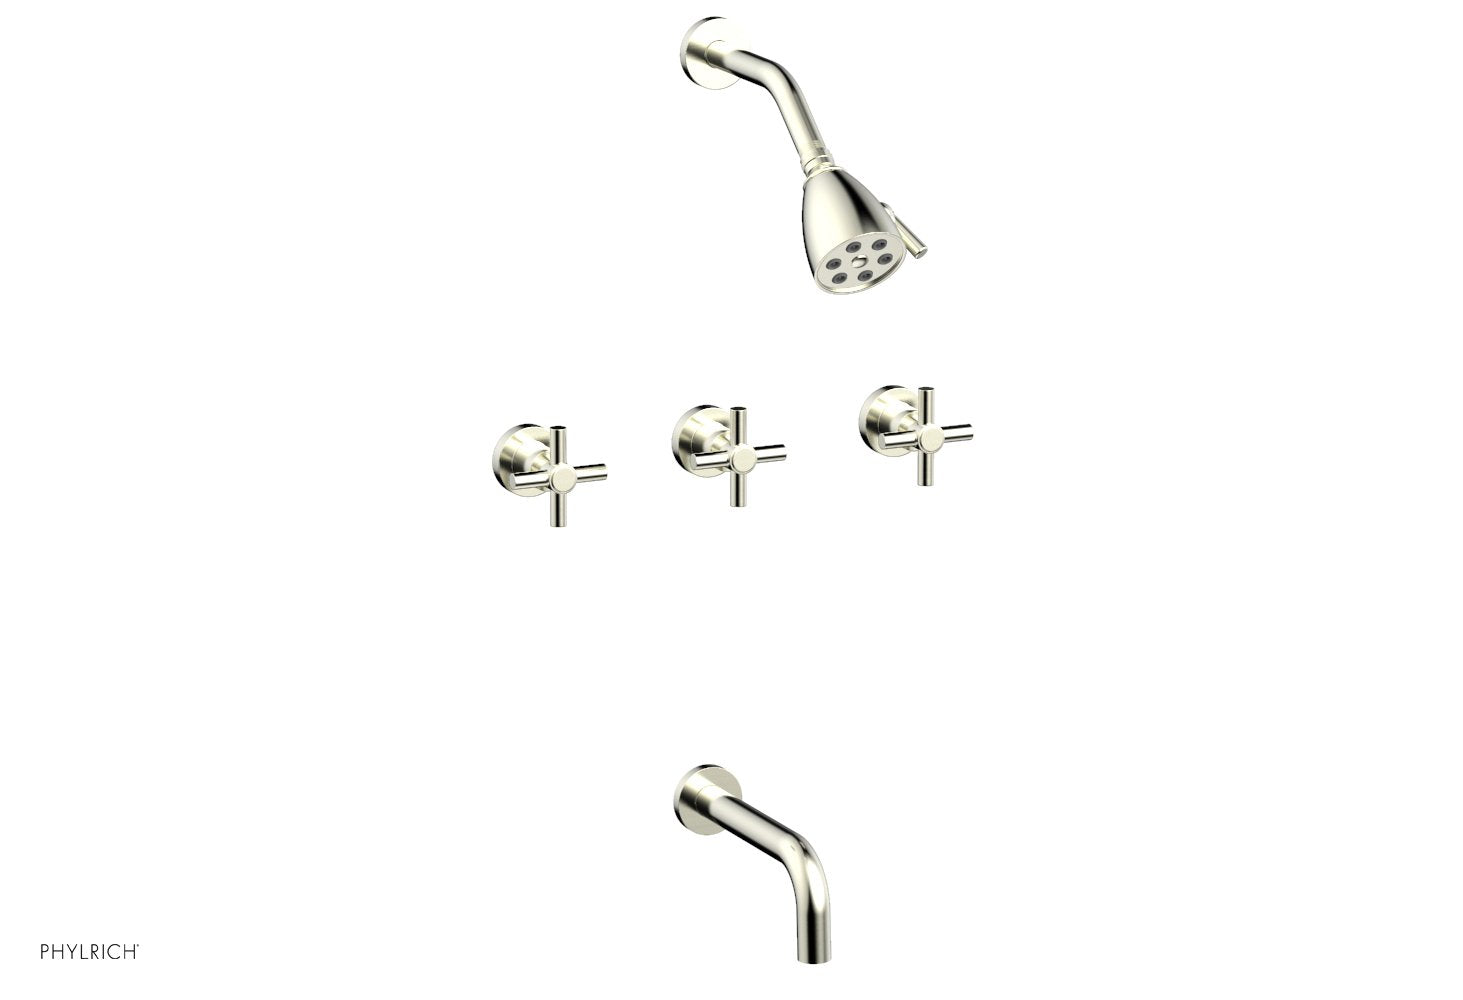 Phylrich BASIC Three Handle Tub and Shower Set 7 1/2" Spout - Tubular Cross Handles